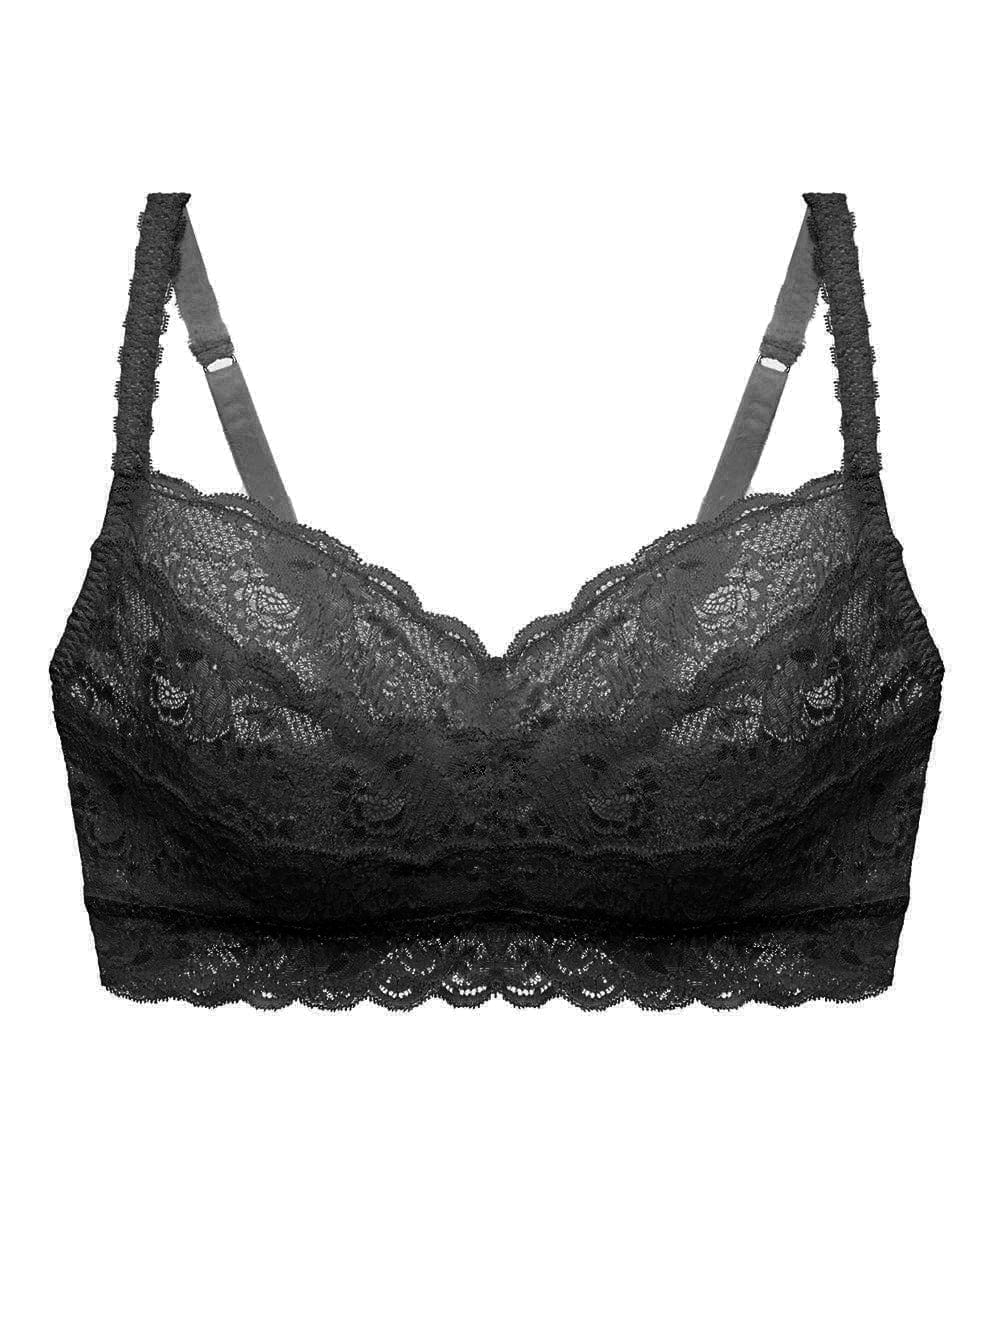 Cosabella bralettes Black / 1X Cosabella Never Say Never Extended Sweetie Bralette